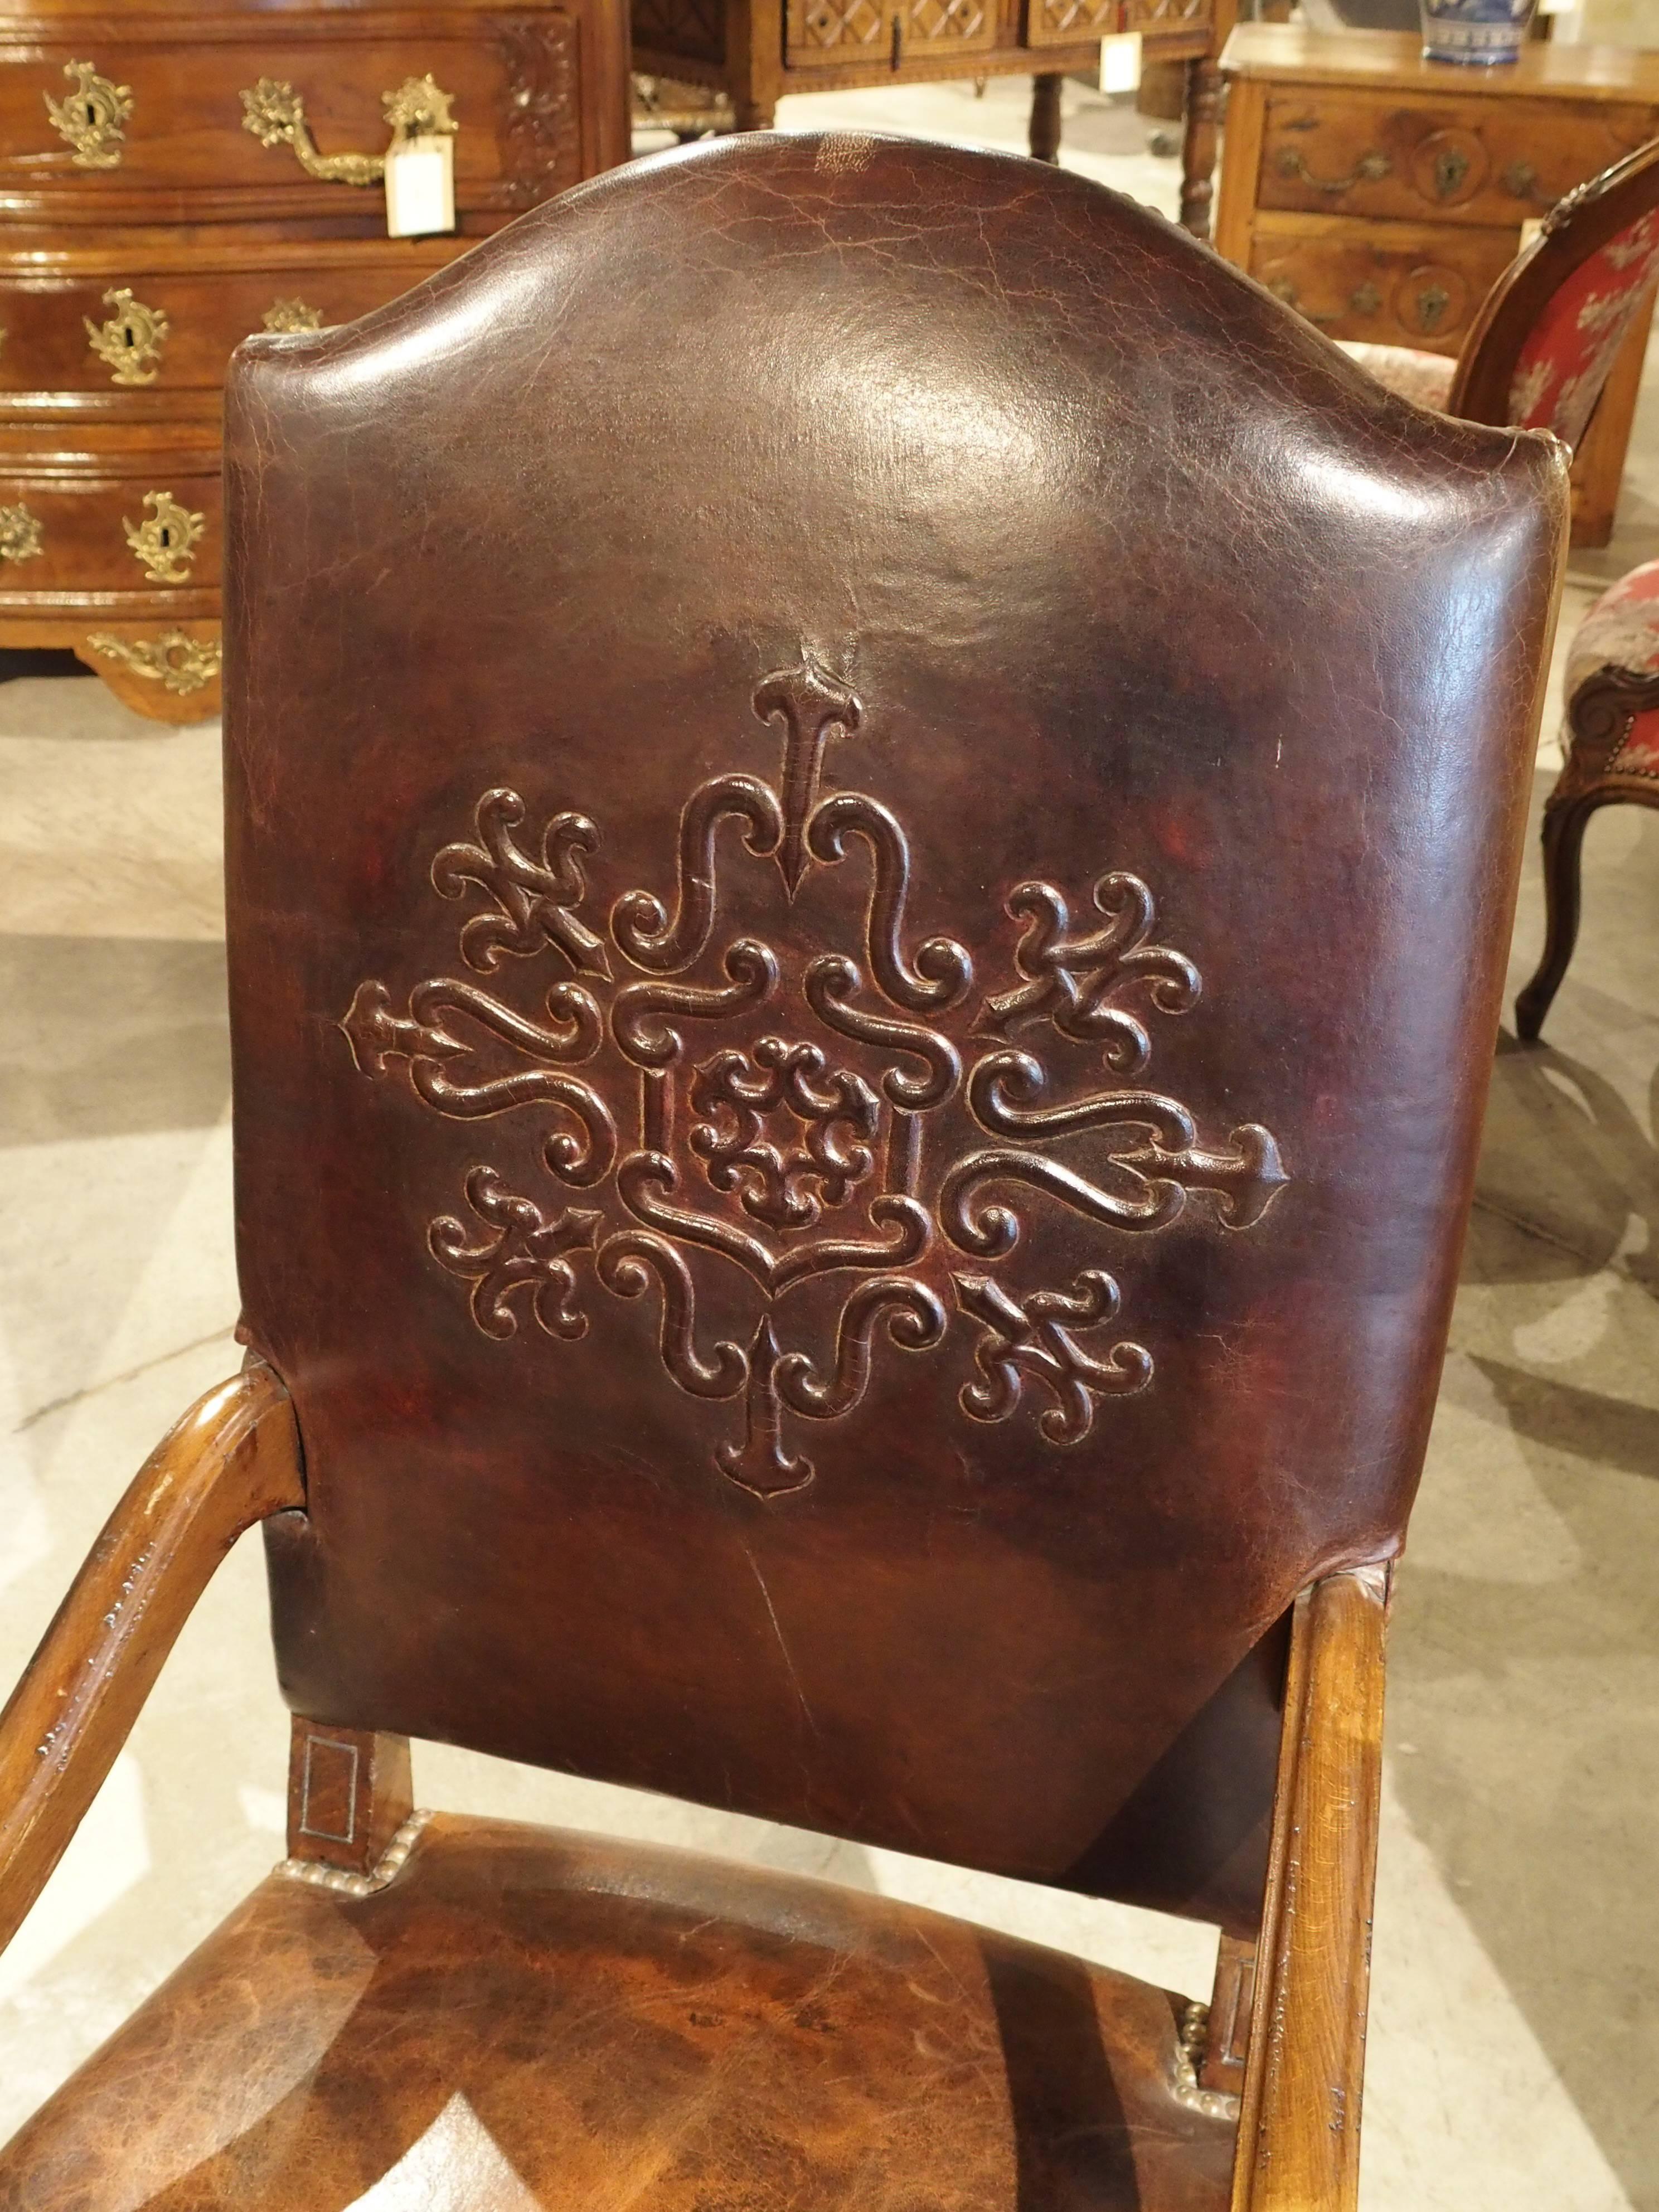 This is a handmade leather armchair from the South of France. The frame is constructed of French walnut and the leather is attached by hundreds of brass nail heads. This is a custom design made for our store and it is one of the last available. It